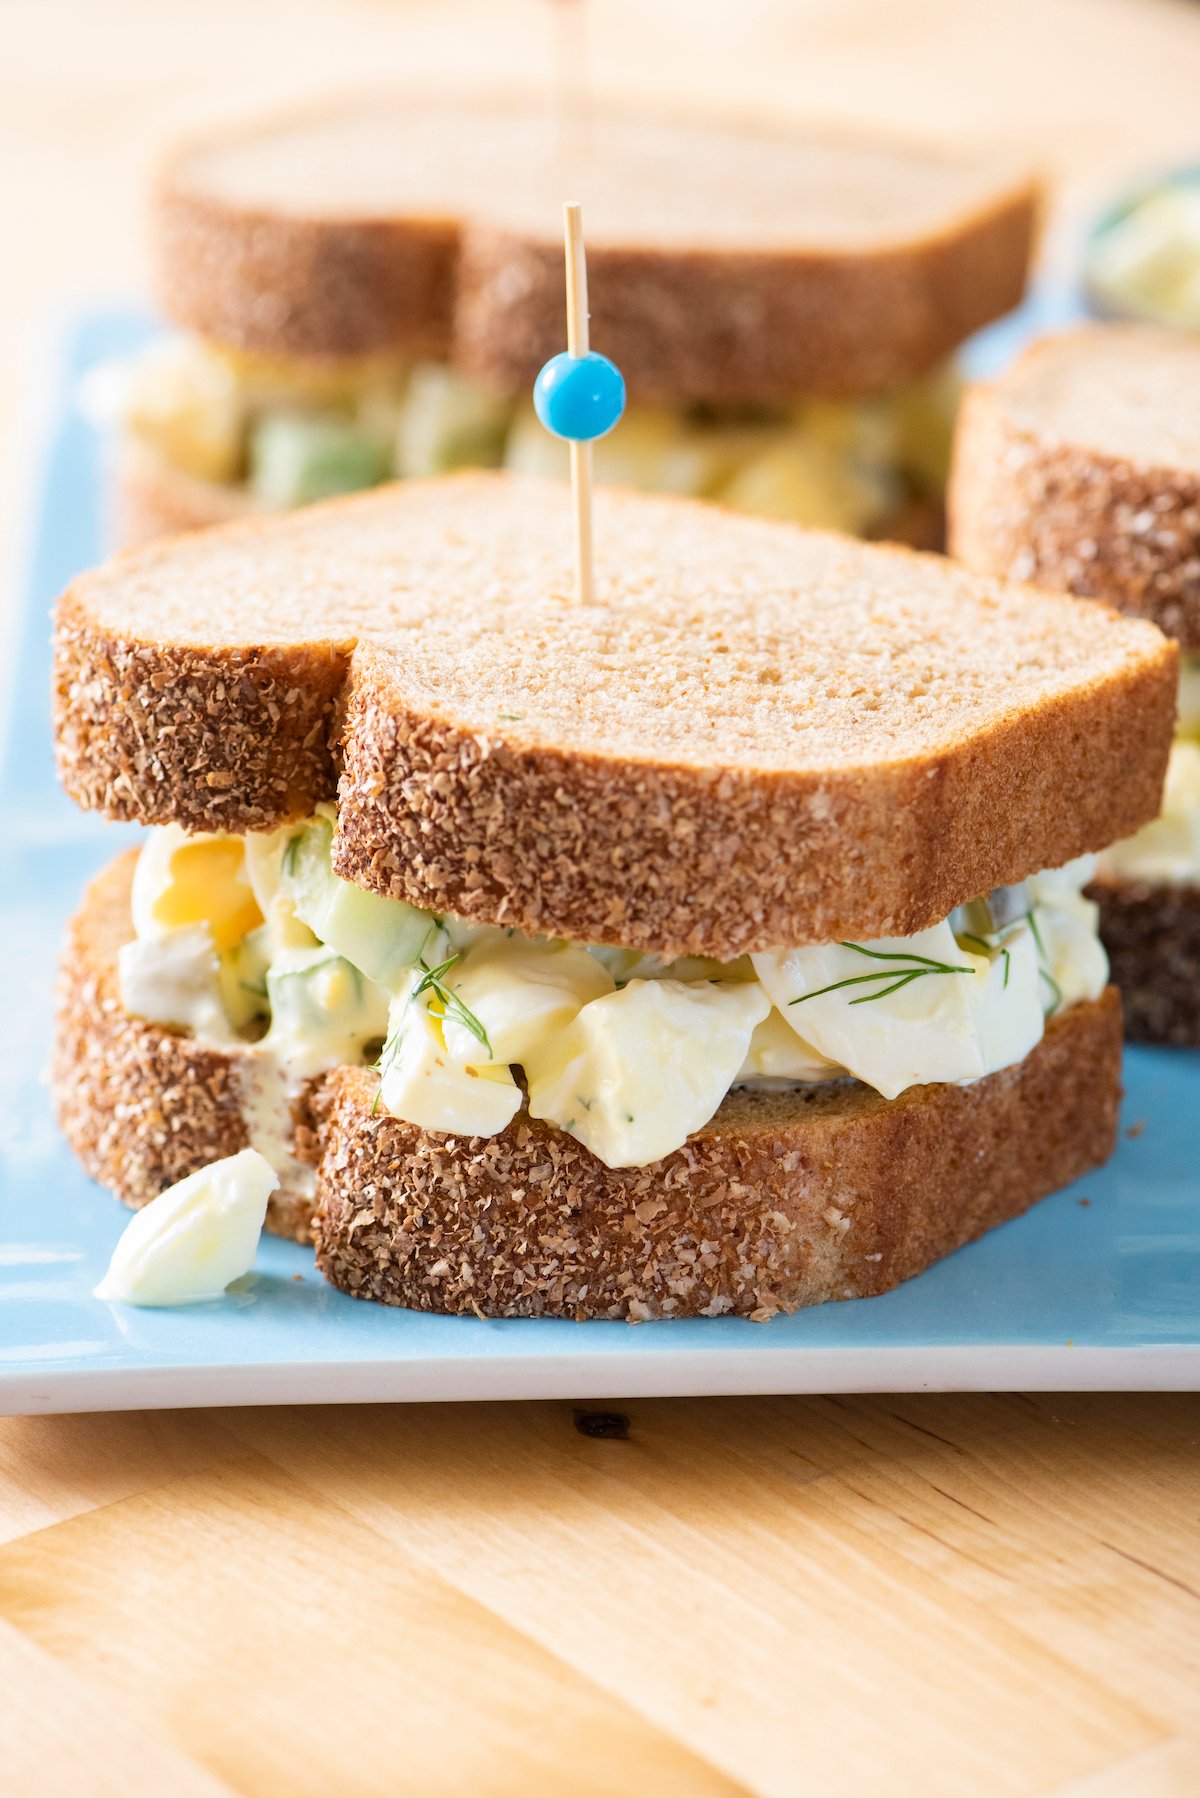 Side view of Egg Salad Sandwich